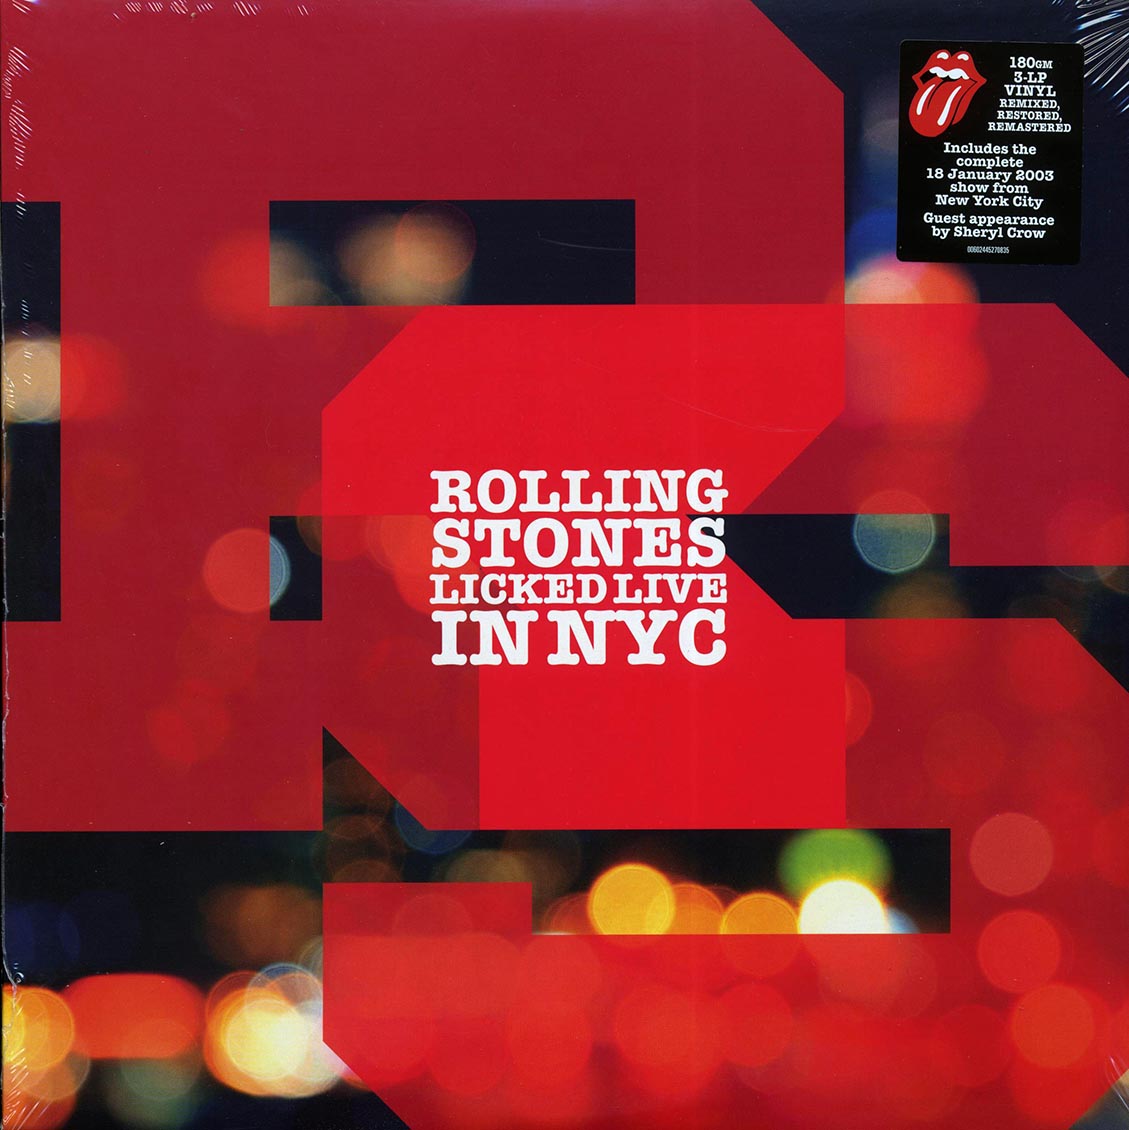 The Rolling Stones - Licked Live In NYC (3xLP) (180g) (remastered) - Vinyl LP